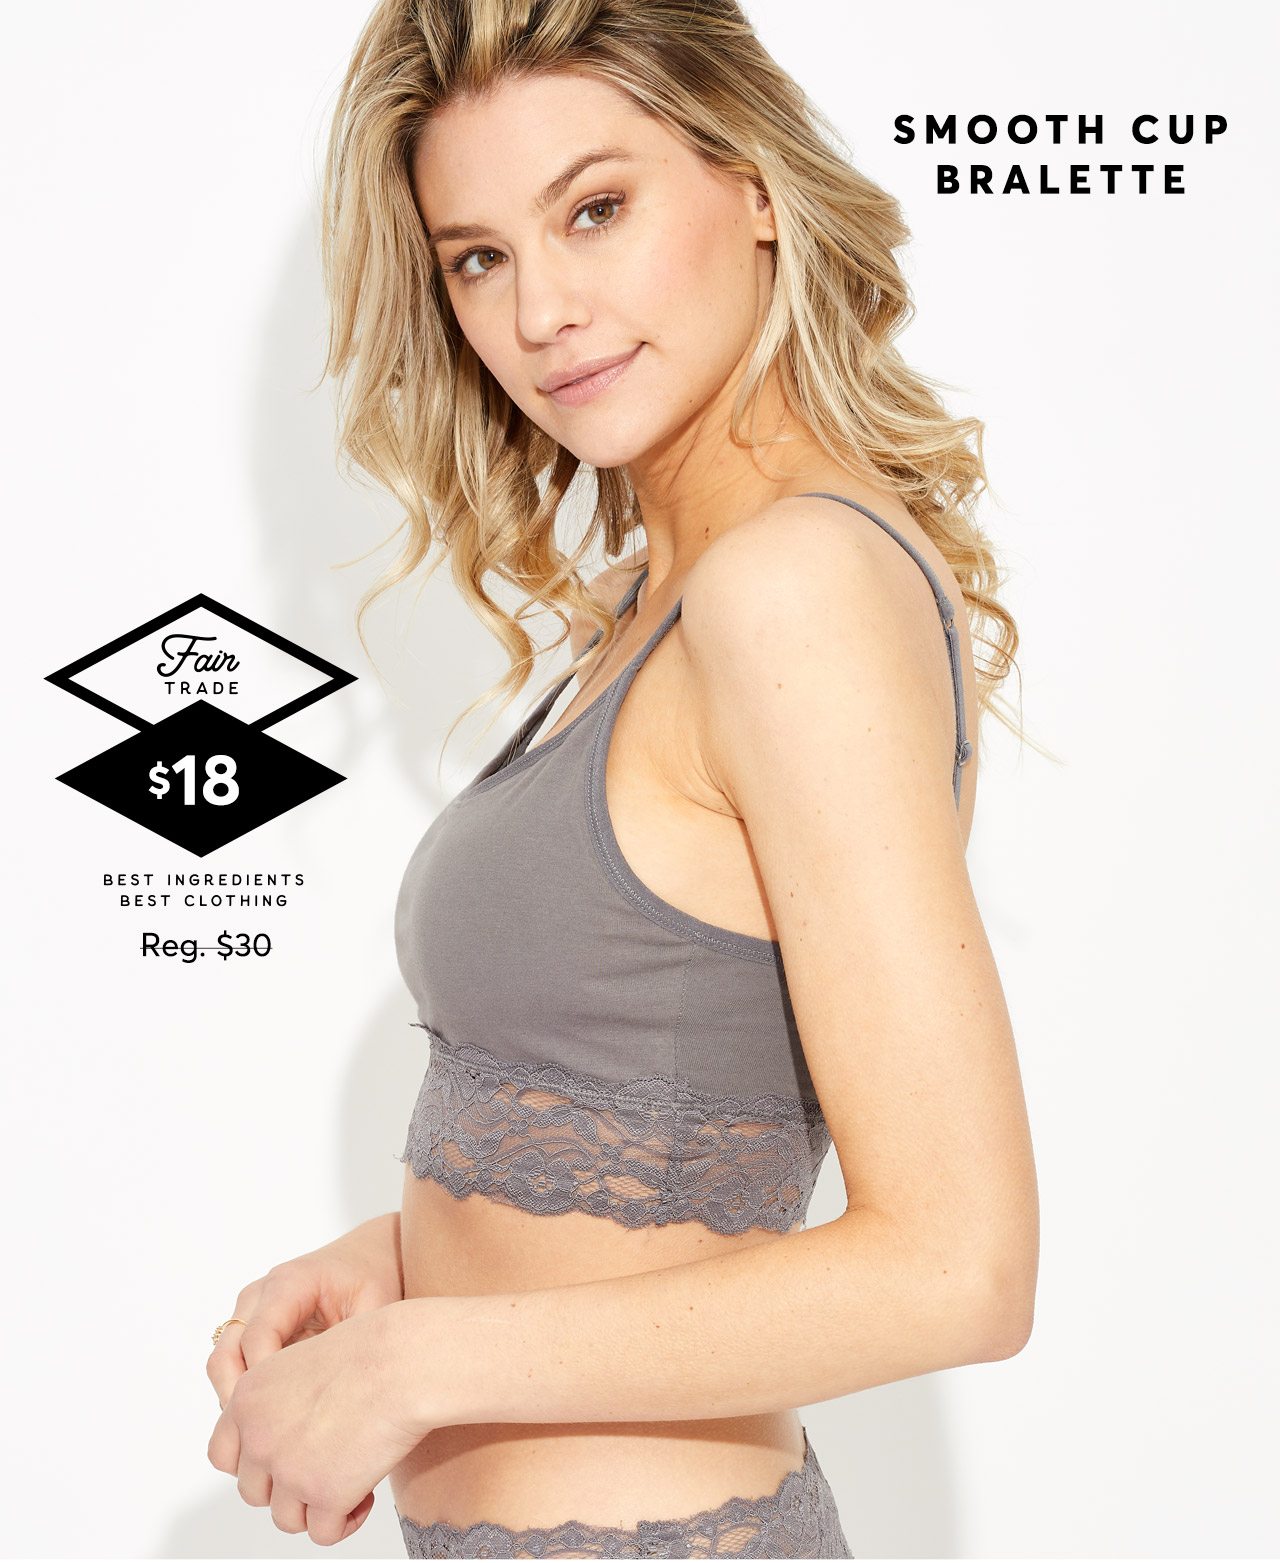 Smooth Cup Bralette $18